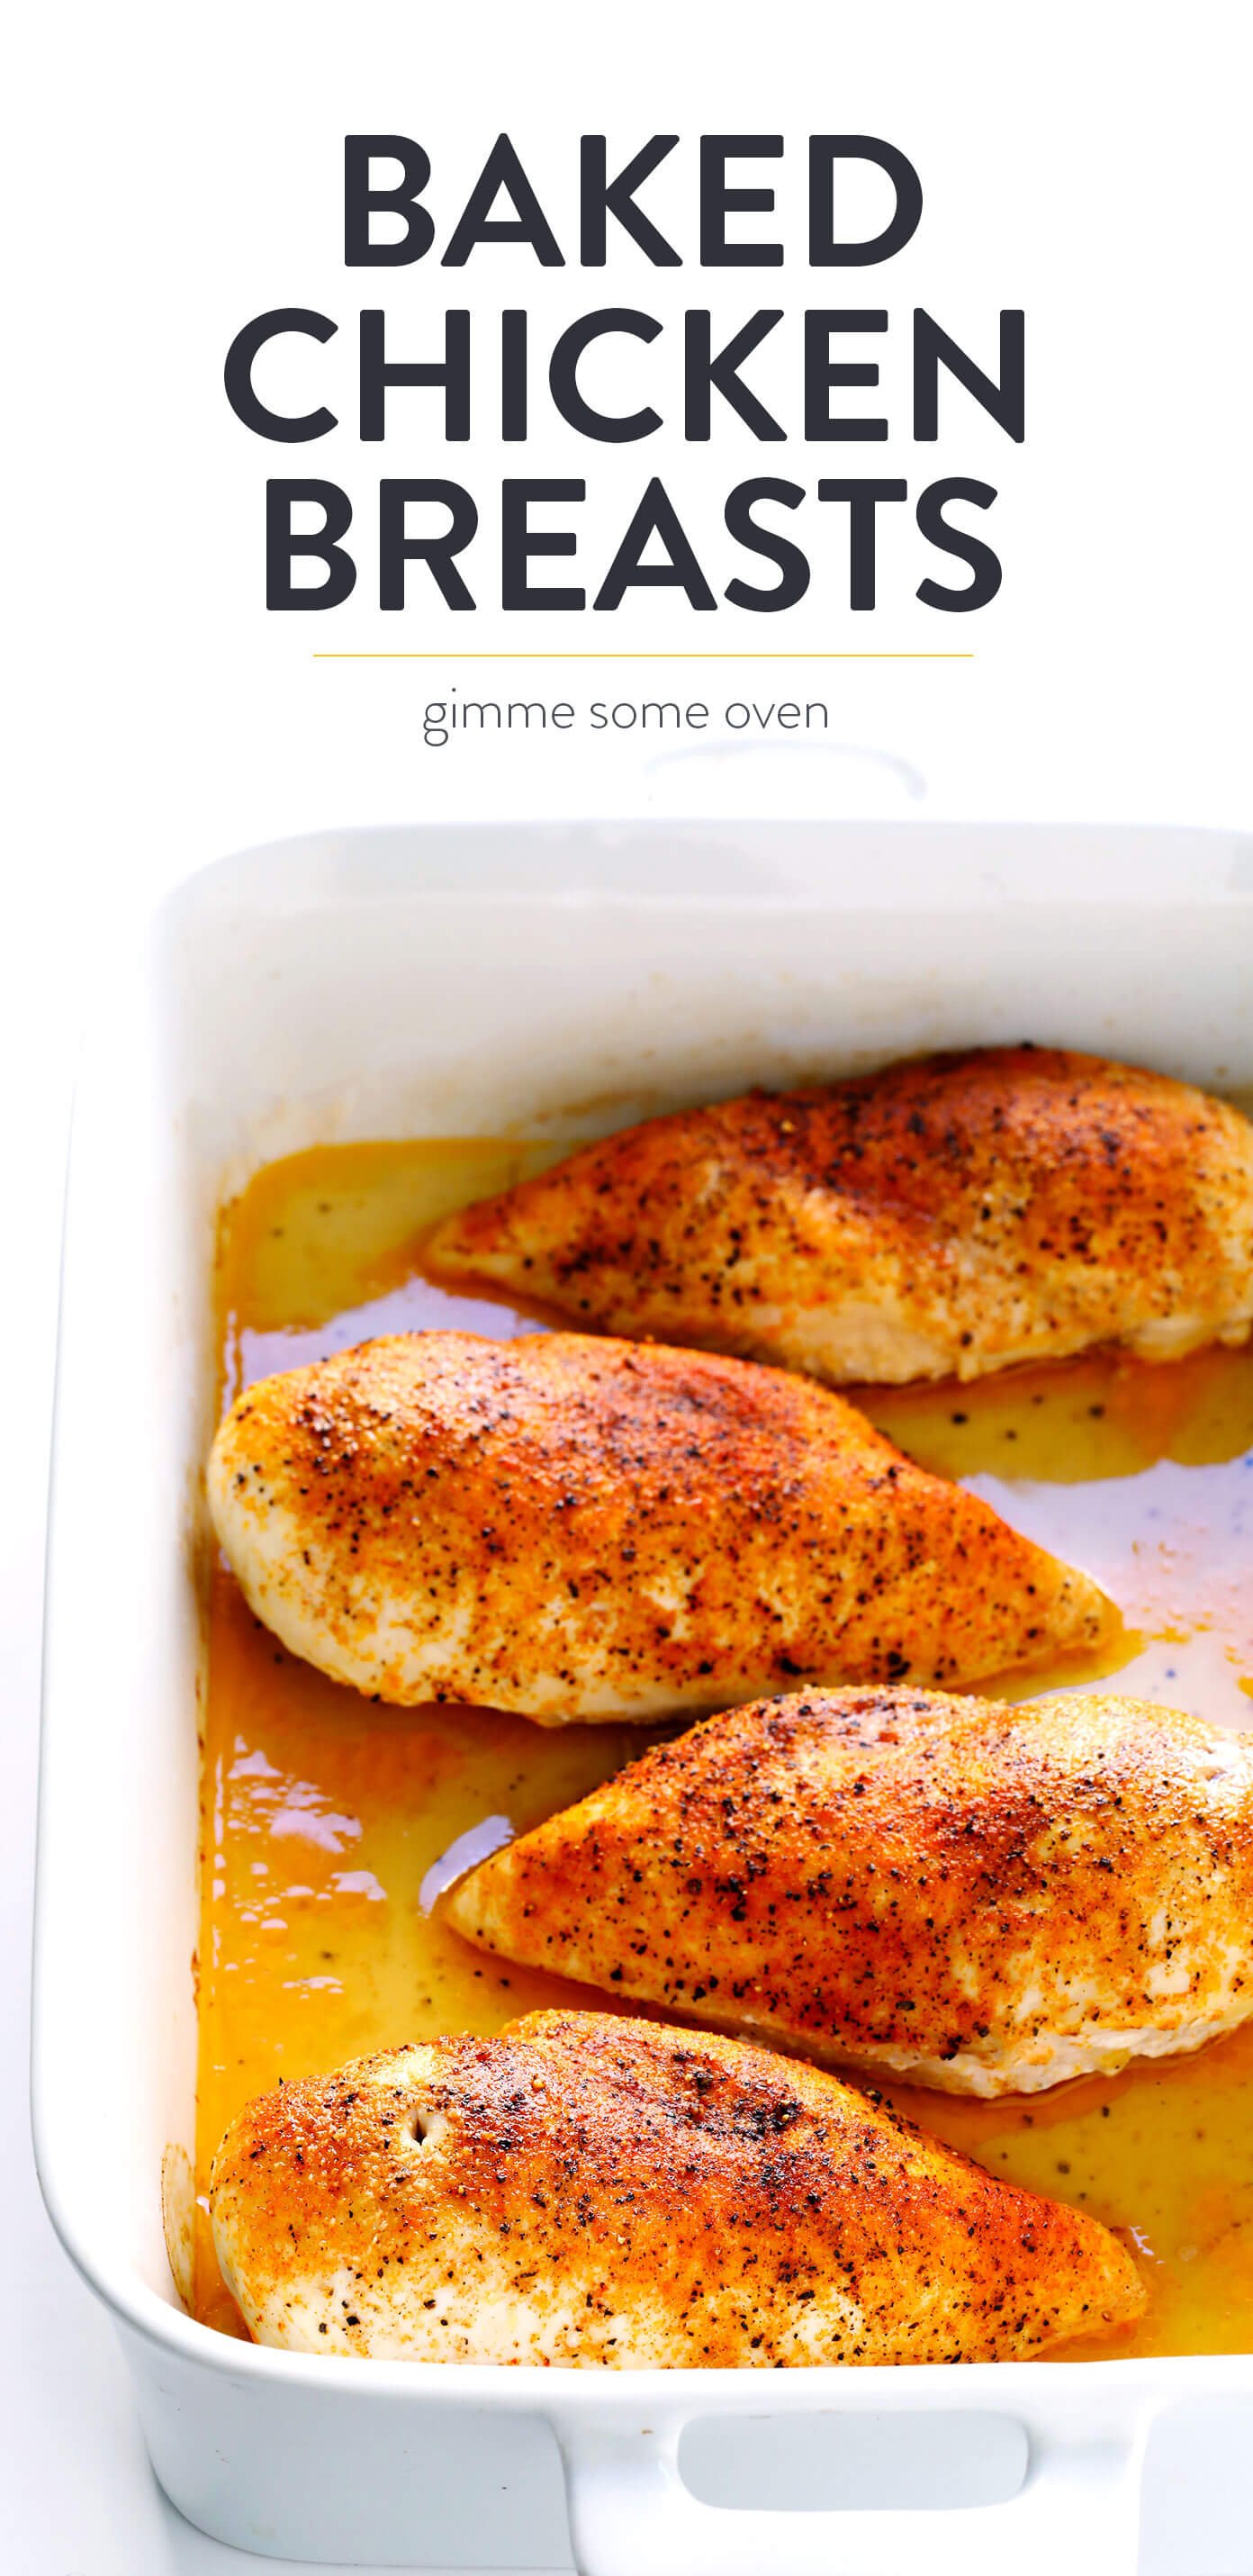 How To Bake Chicken Breasts